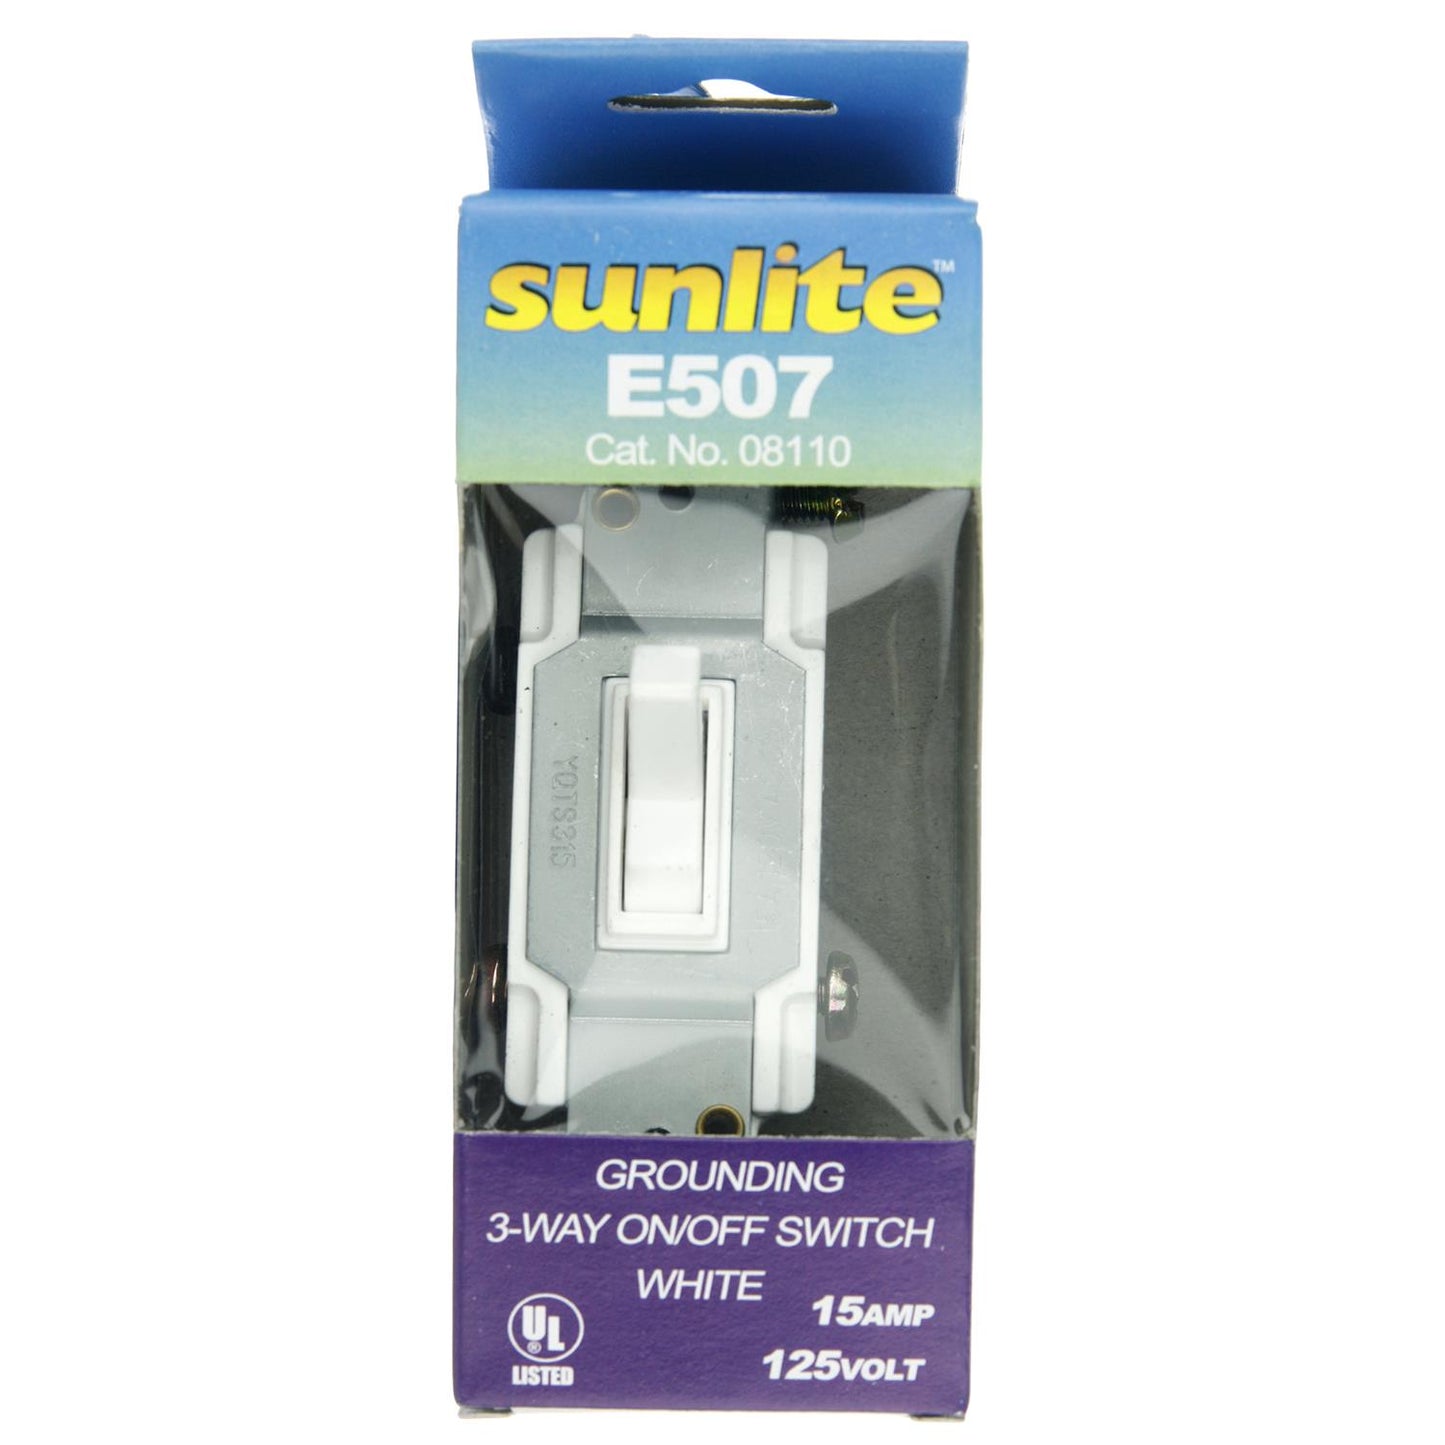 Sunlite E507 3 Way Grounded Toggle Switch, White